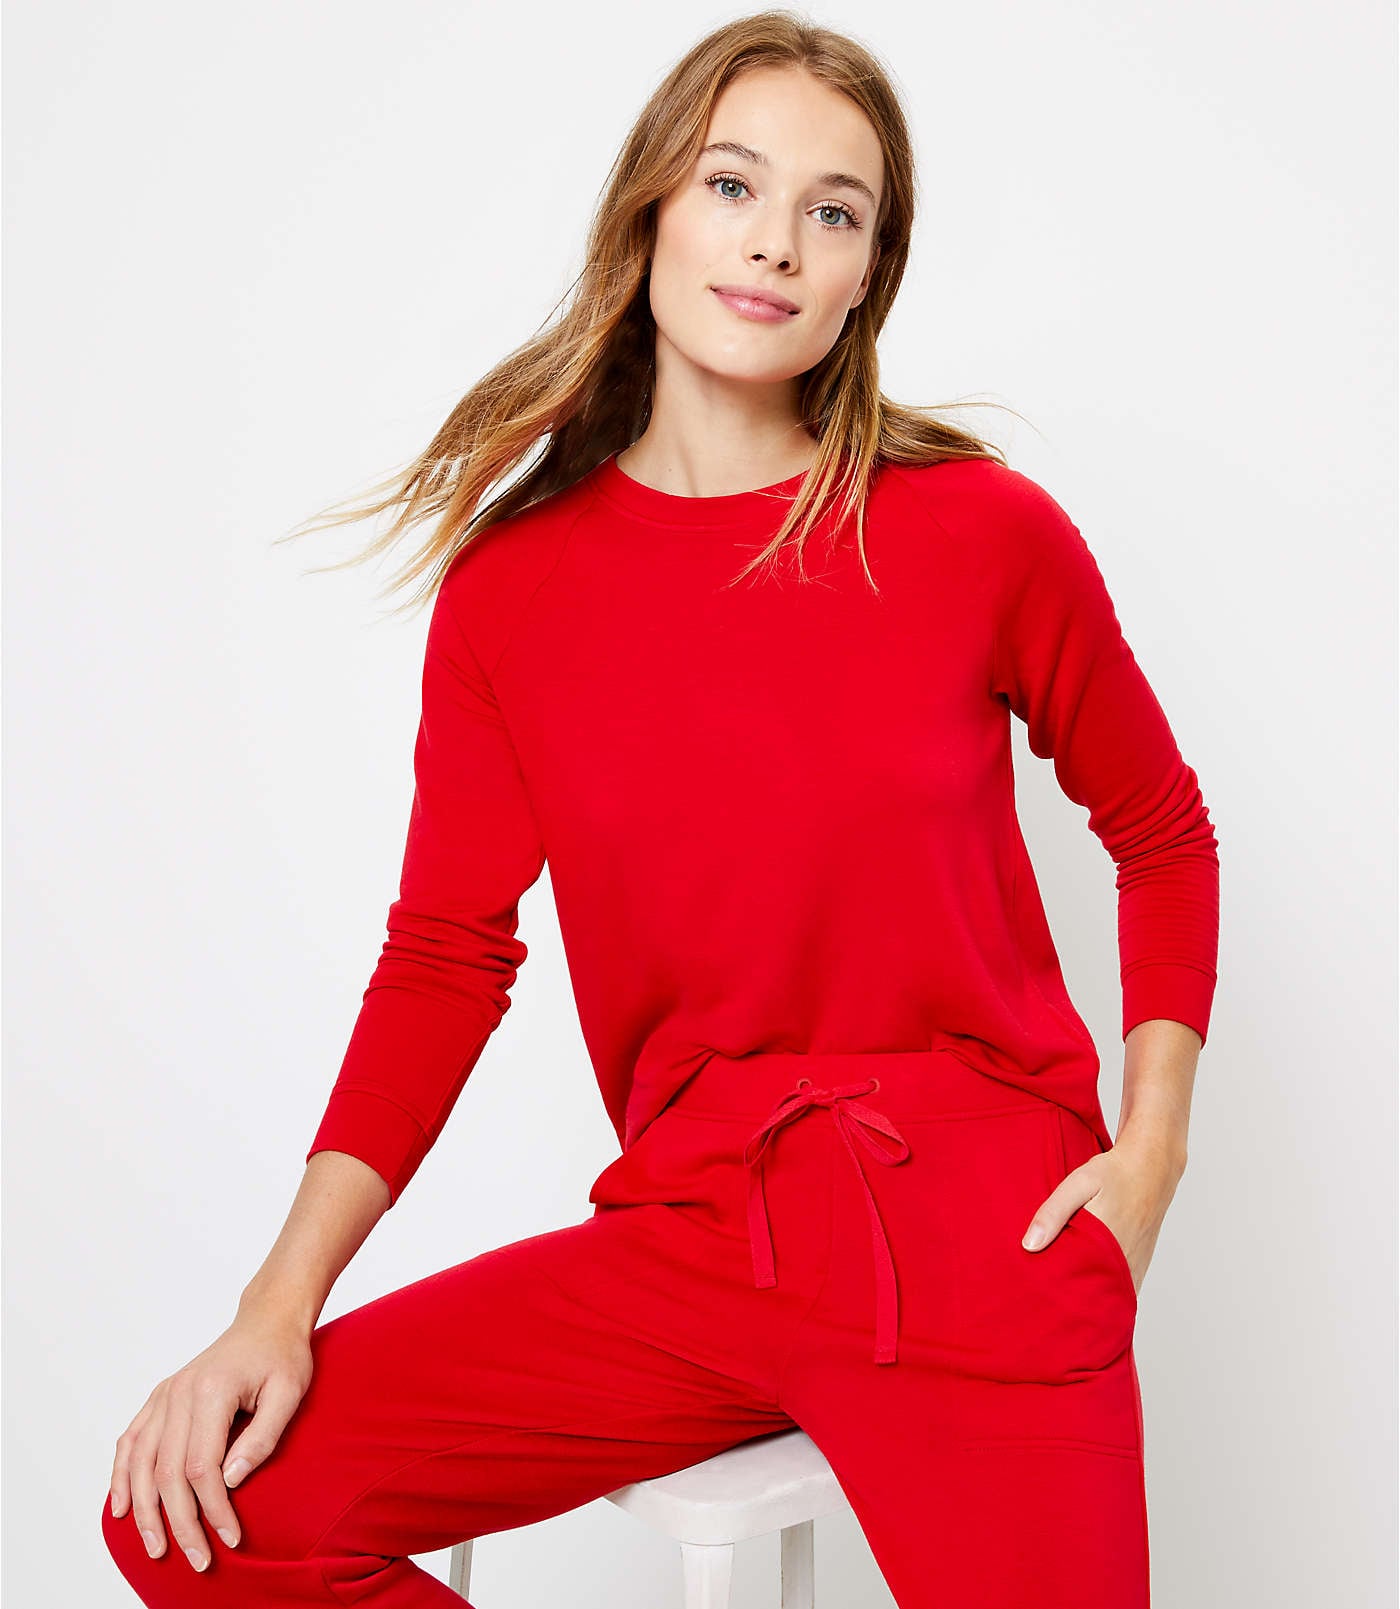 Lou & Grey Signature Softblend Sweatshirt and Sweatpants, Here's How to  Wear Red This Valentine's Day Without Looking Cheesy